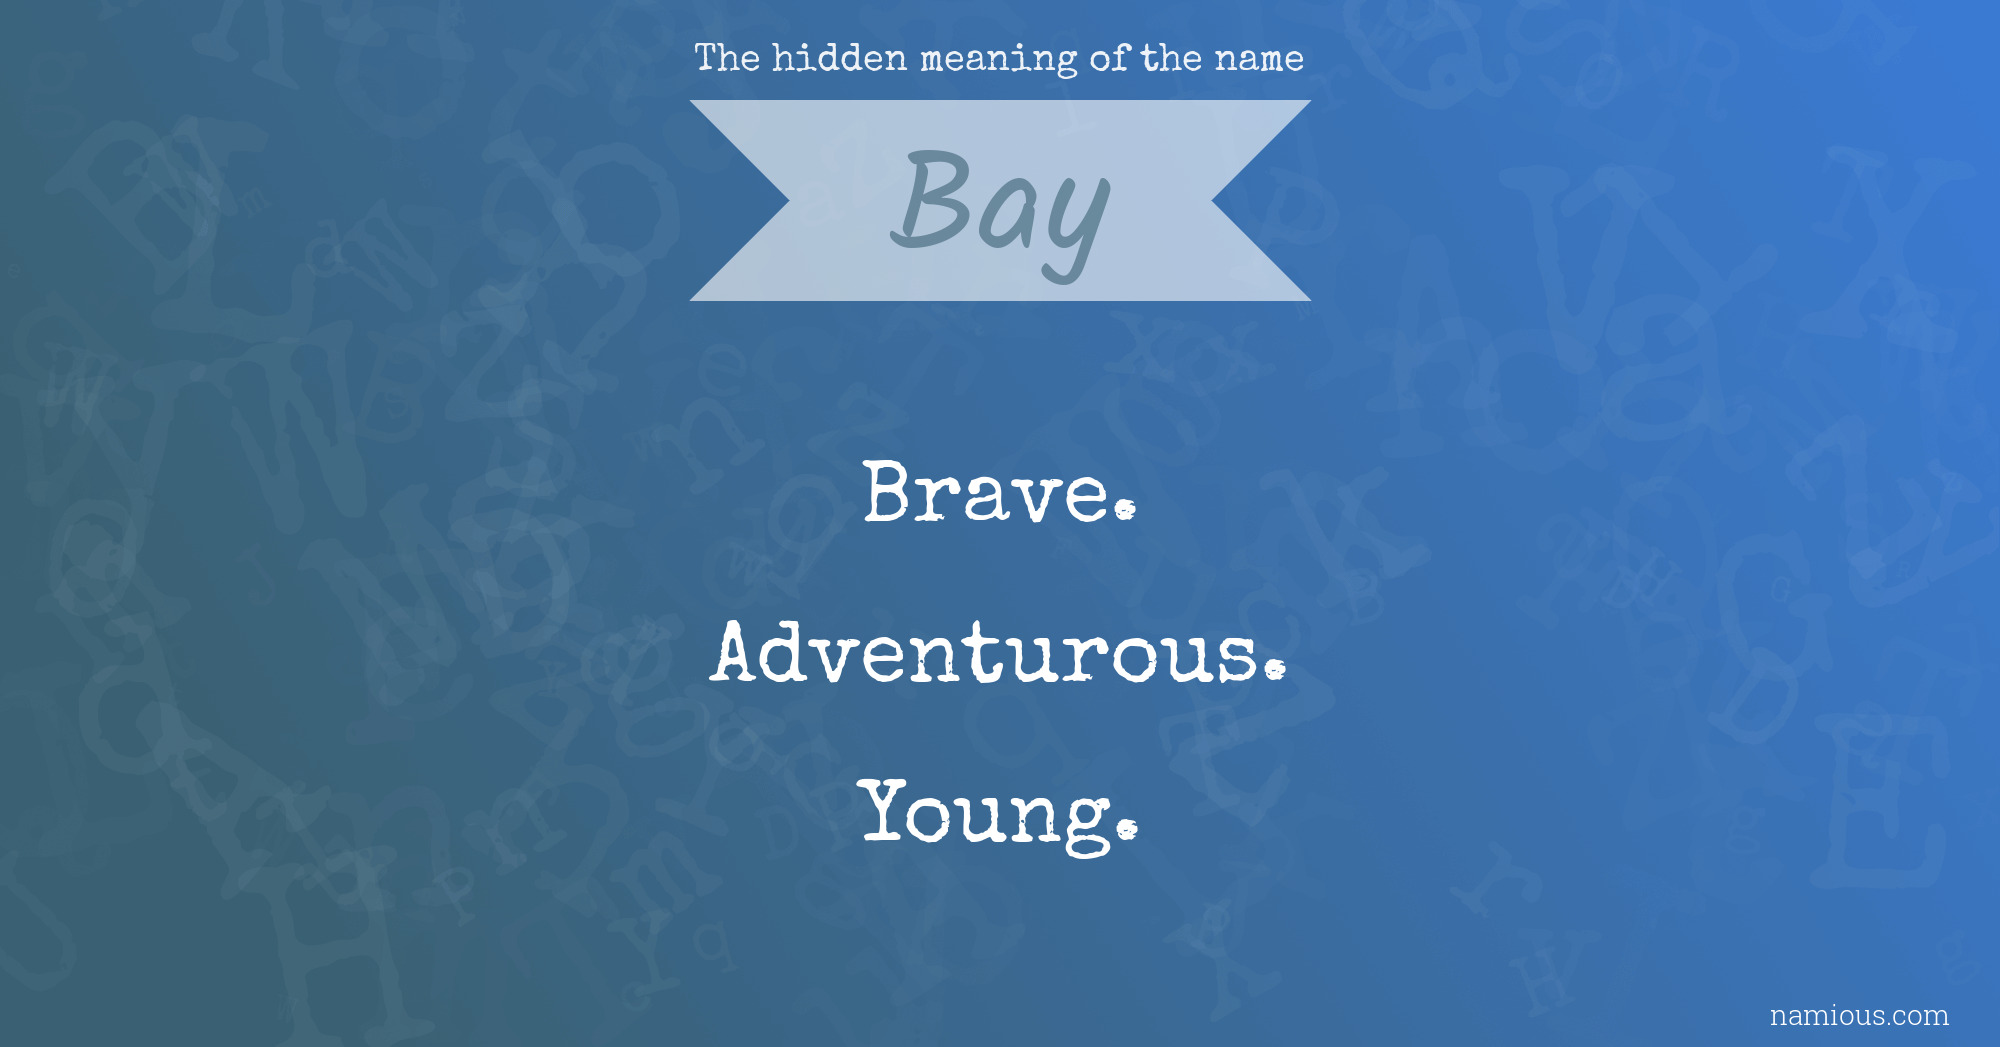 The hidden meaning of the name Bay